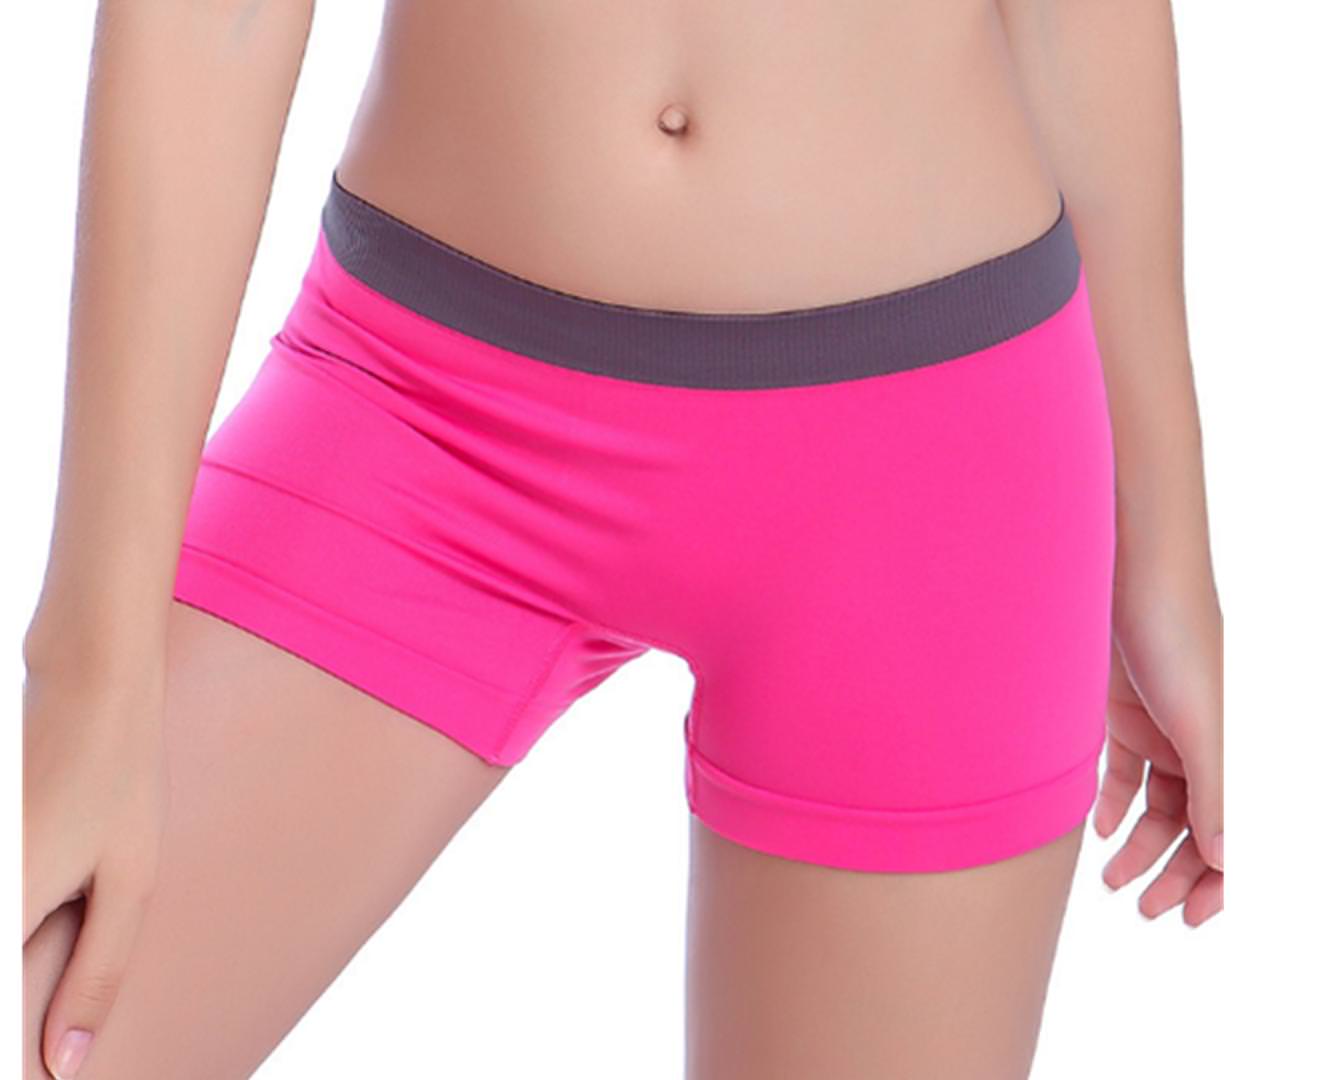 3 Pack of Women High Waist Sports Shorts Casual Beach Yoga Dance Workout Slim Safety Pants